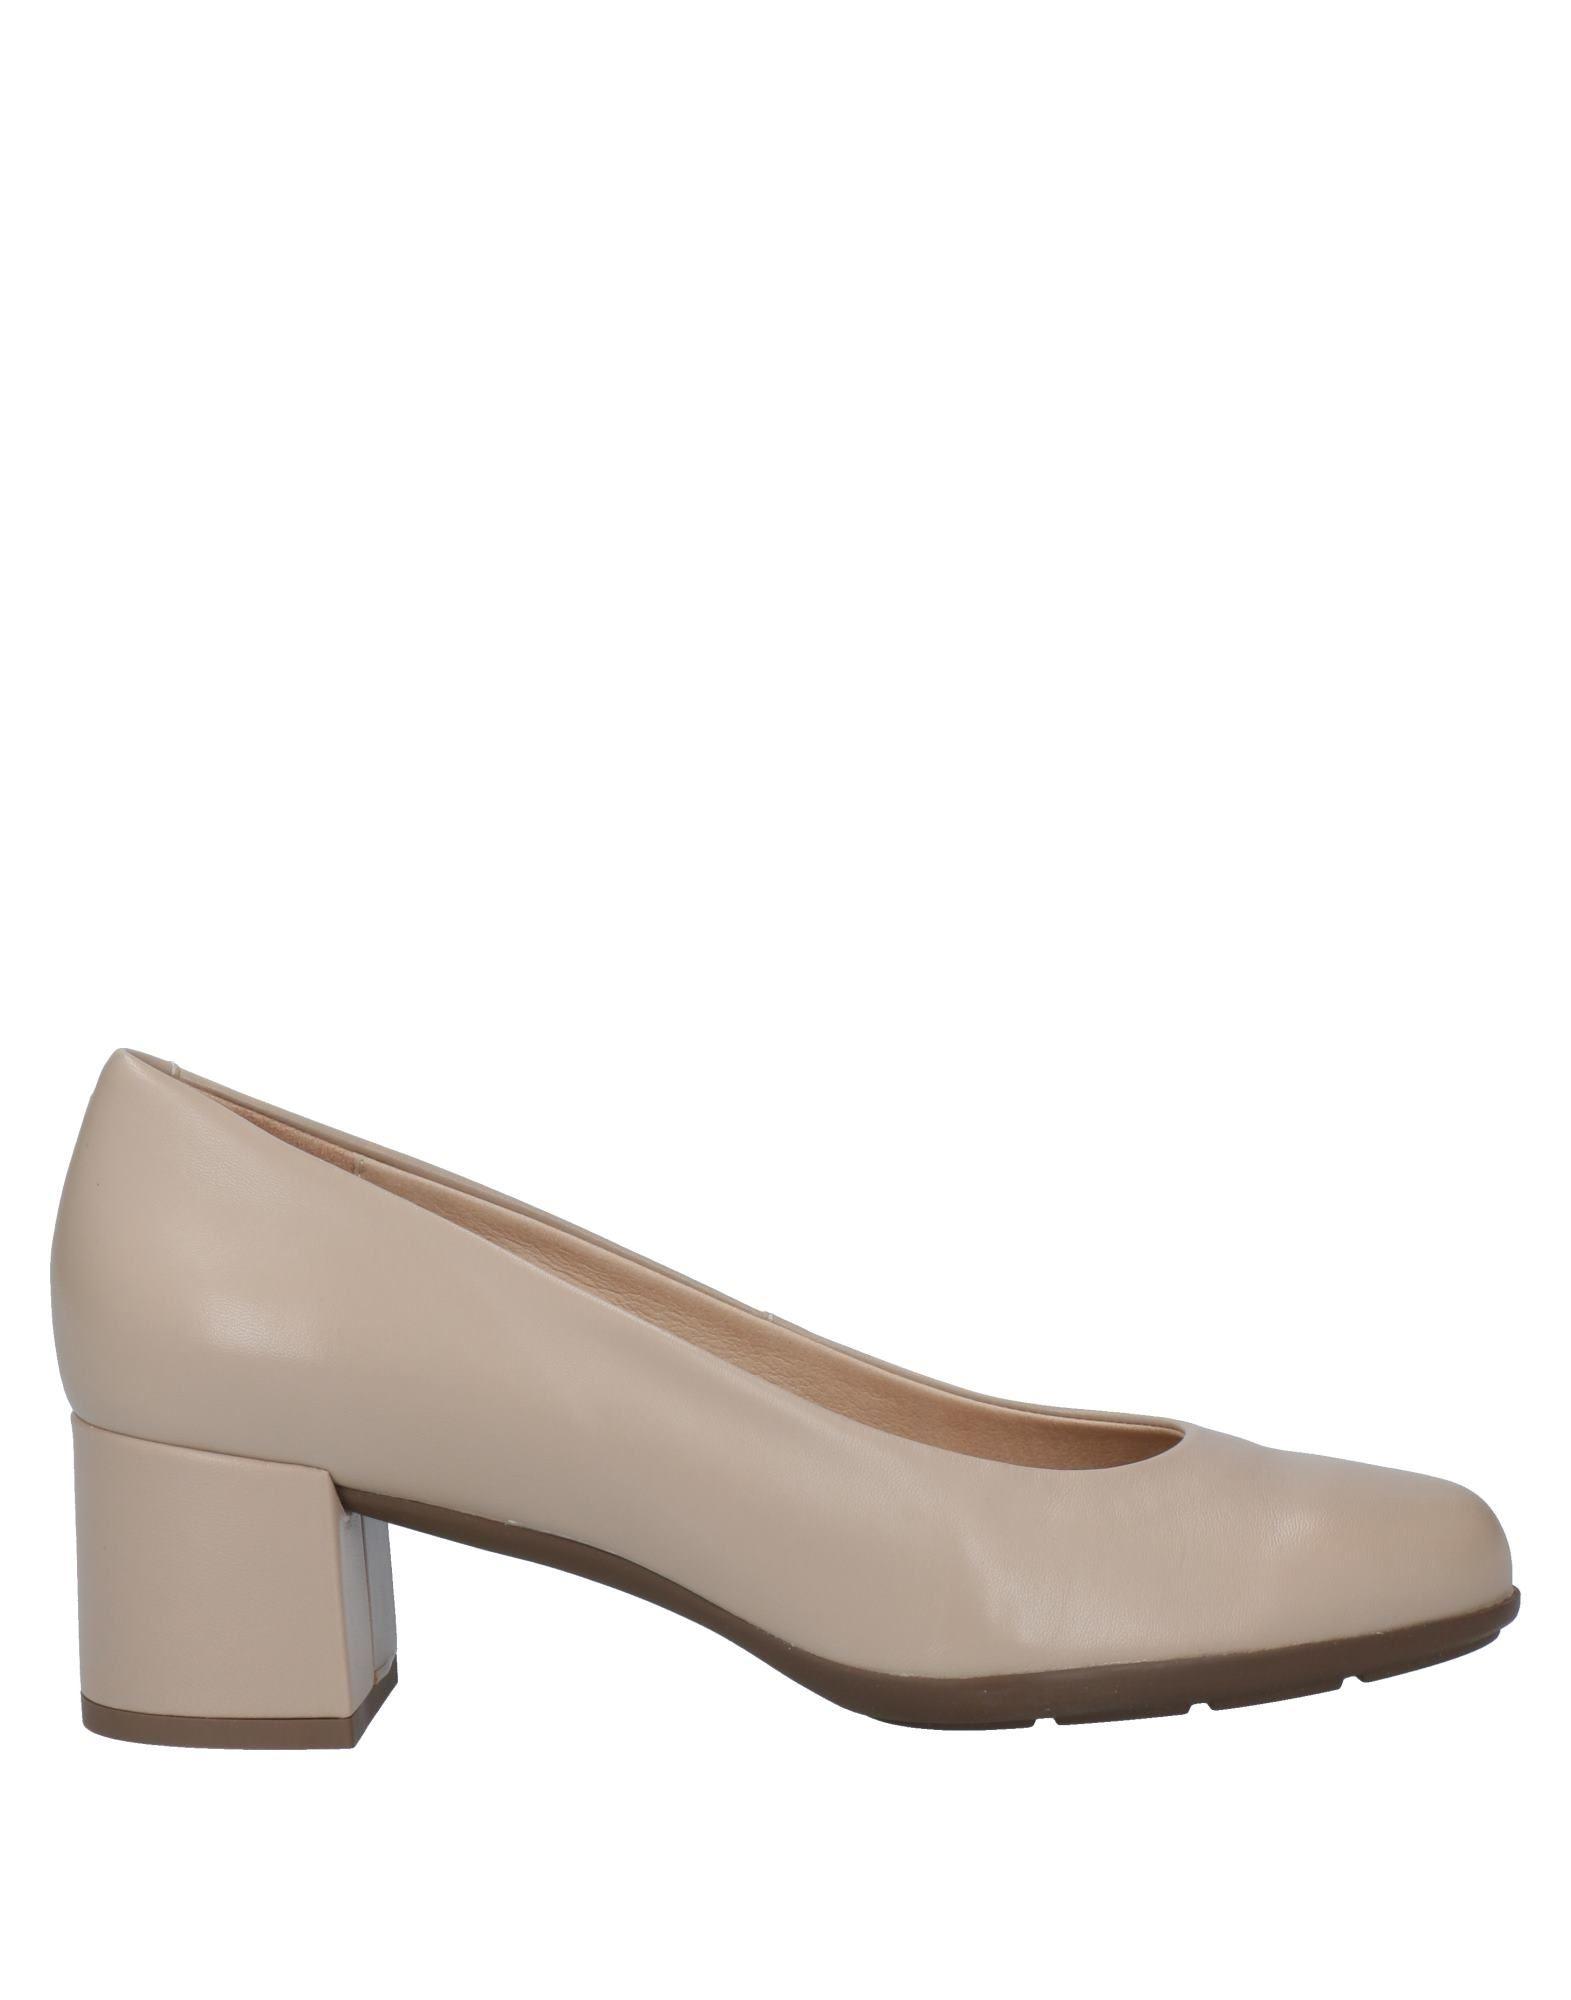 Geox Leather Pumps in Ivory (White) | Lyst